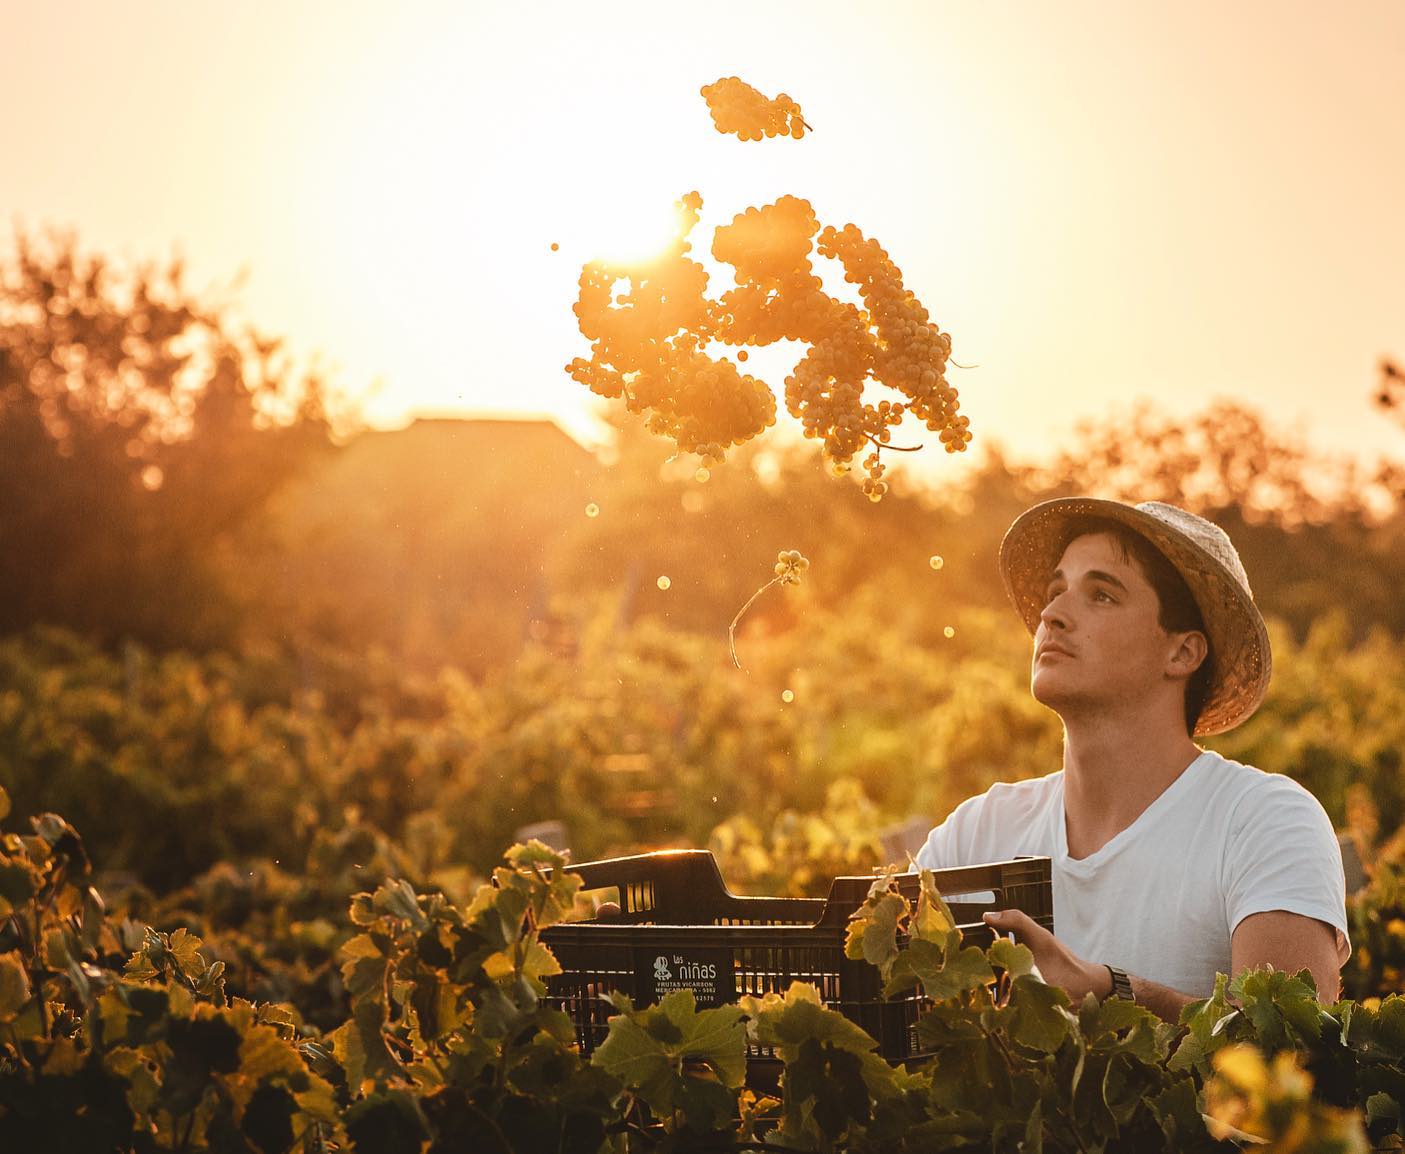 Image of a young man in the vineyard throwing white grapes in the air during the sunset